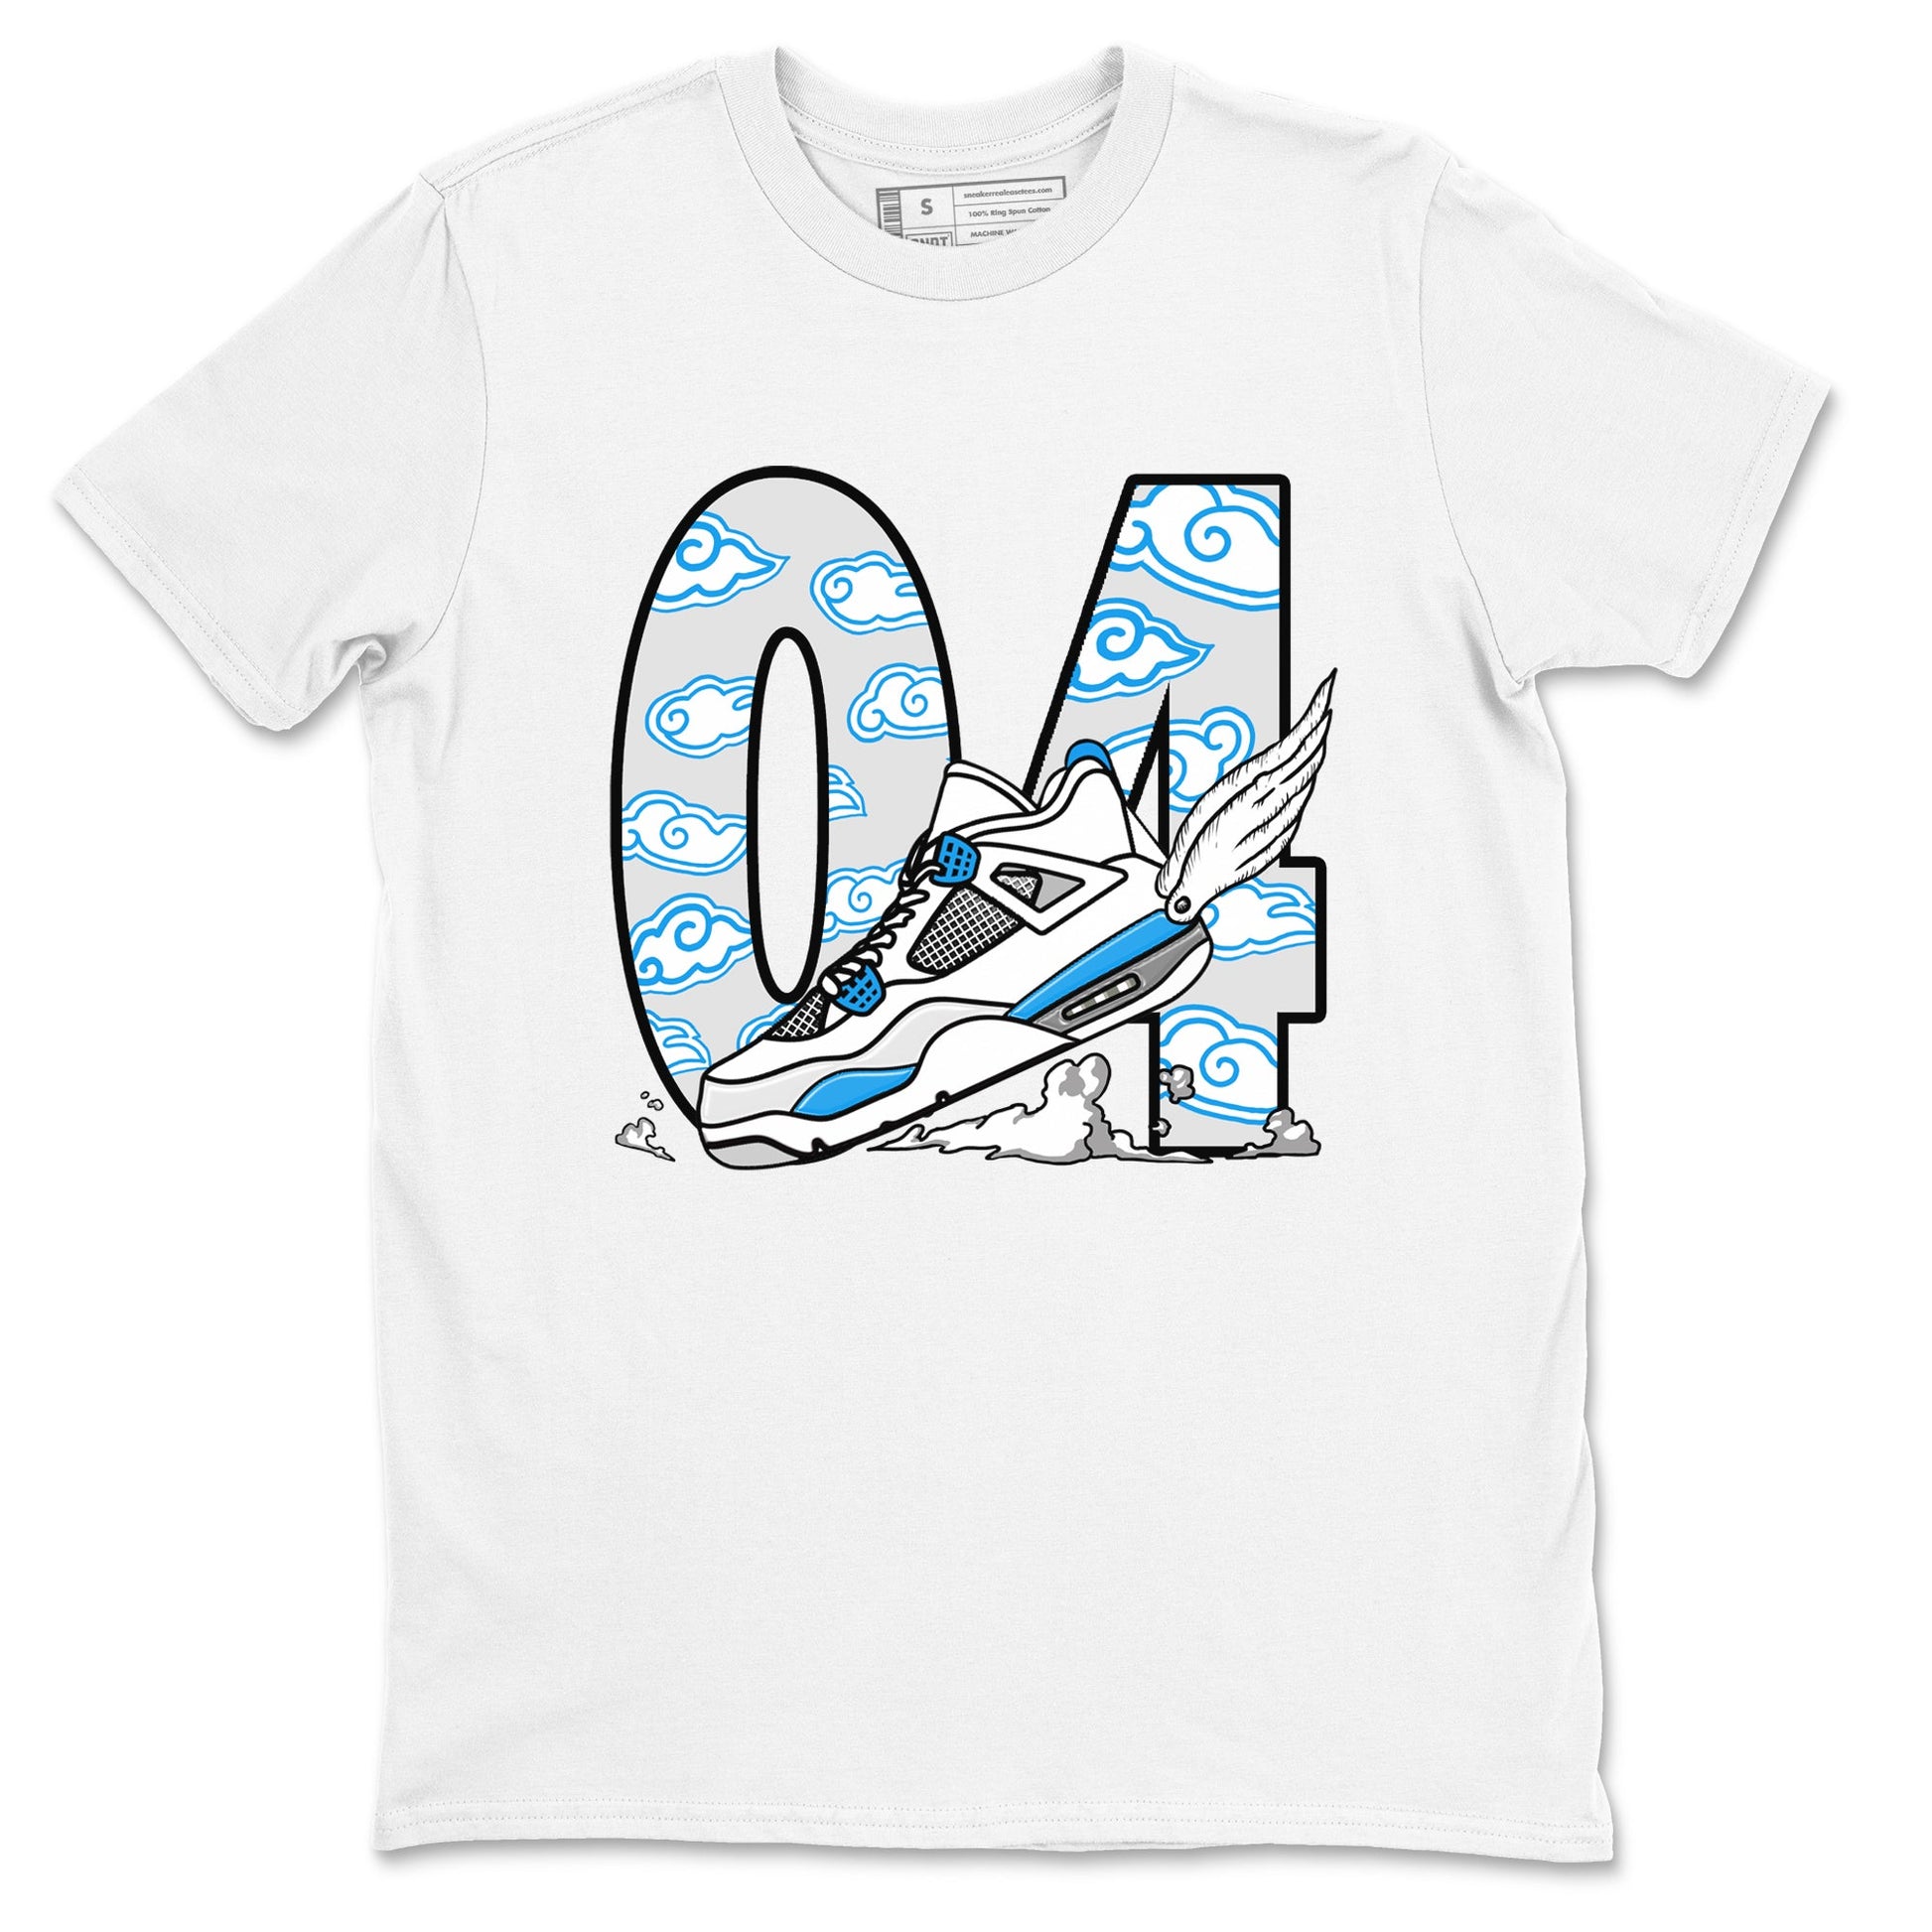 4s Military Blue shirt to match jordans Fly To The Clouds sneaker tees Air Jordan 4 Military Blue SNRT Sneaker Release Tees unisex cotton White 2 crew neck shirt